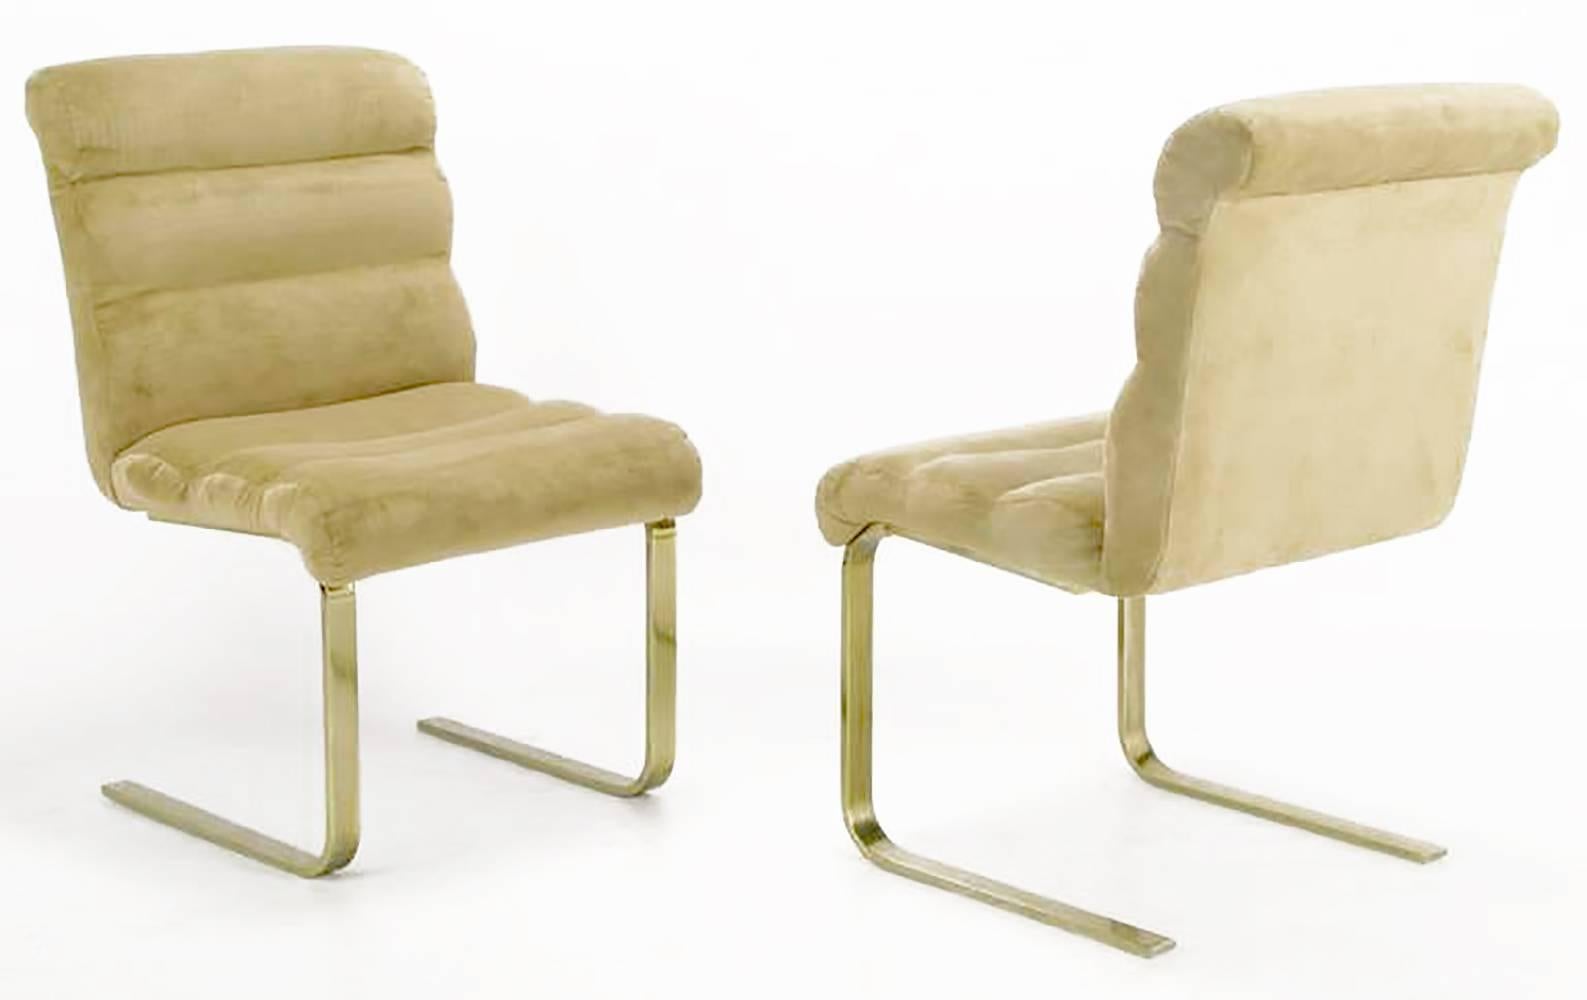 Set of four cantilevered Lugano dining chairs, by Mariani for Pace Collection. Legs are lacquered and toned brass. Seats and backs are one piece bentwood covered in a rolled tan ultra suede. 

Brass toned legs can be stripped and polished to